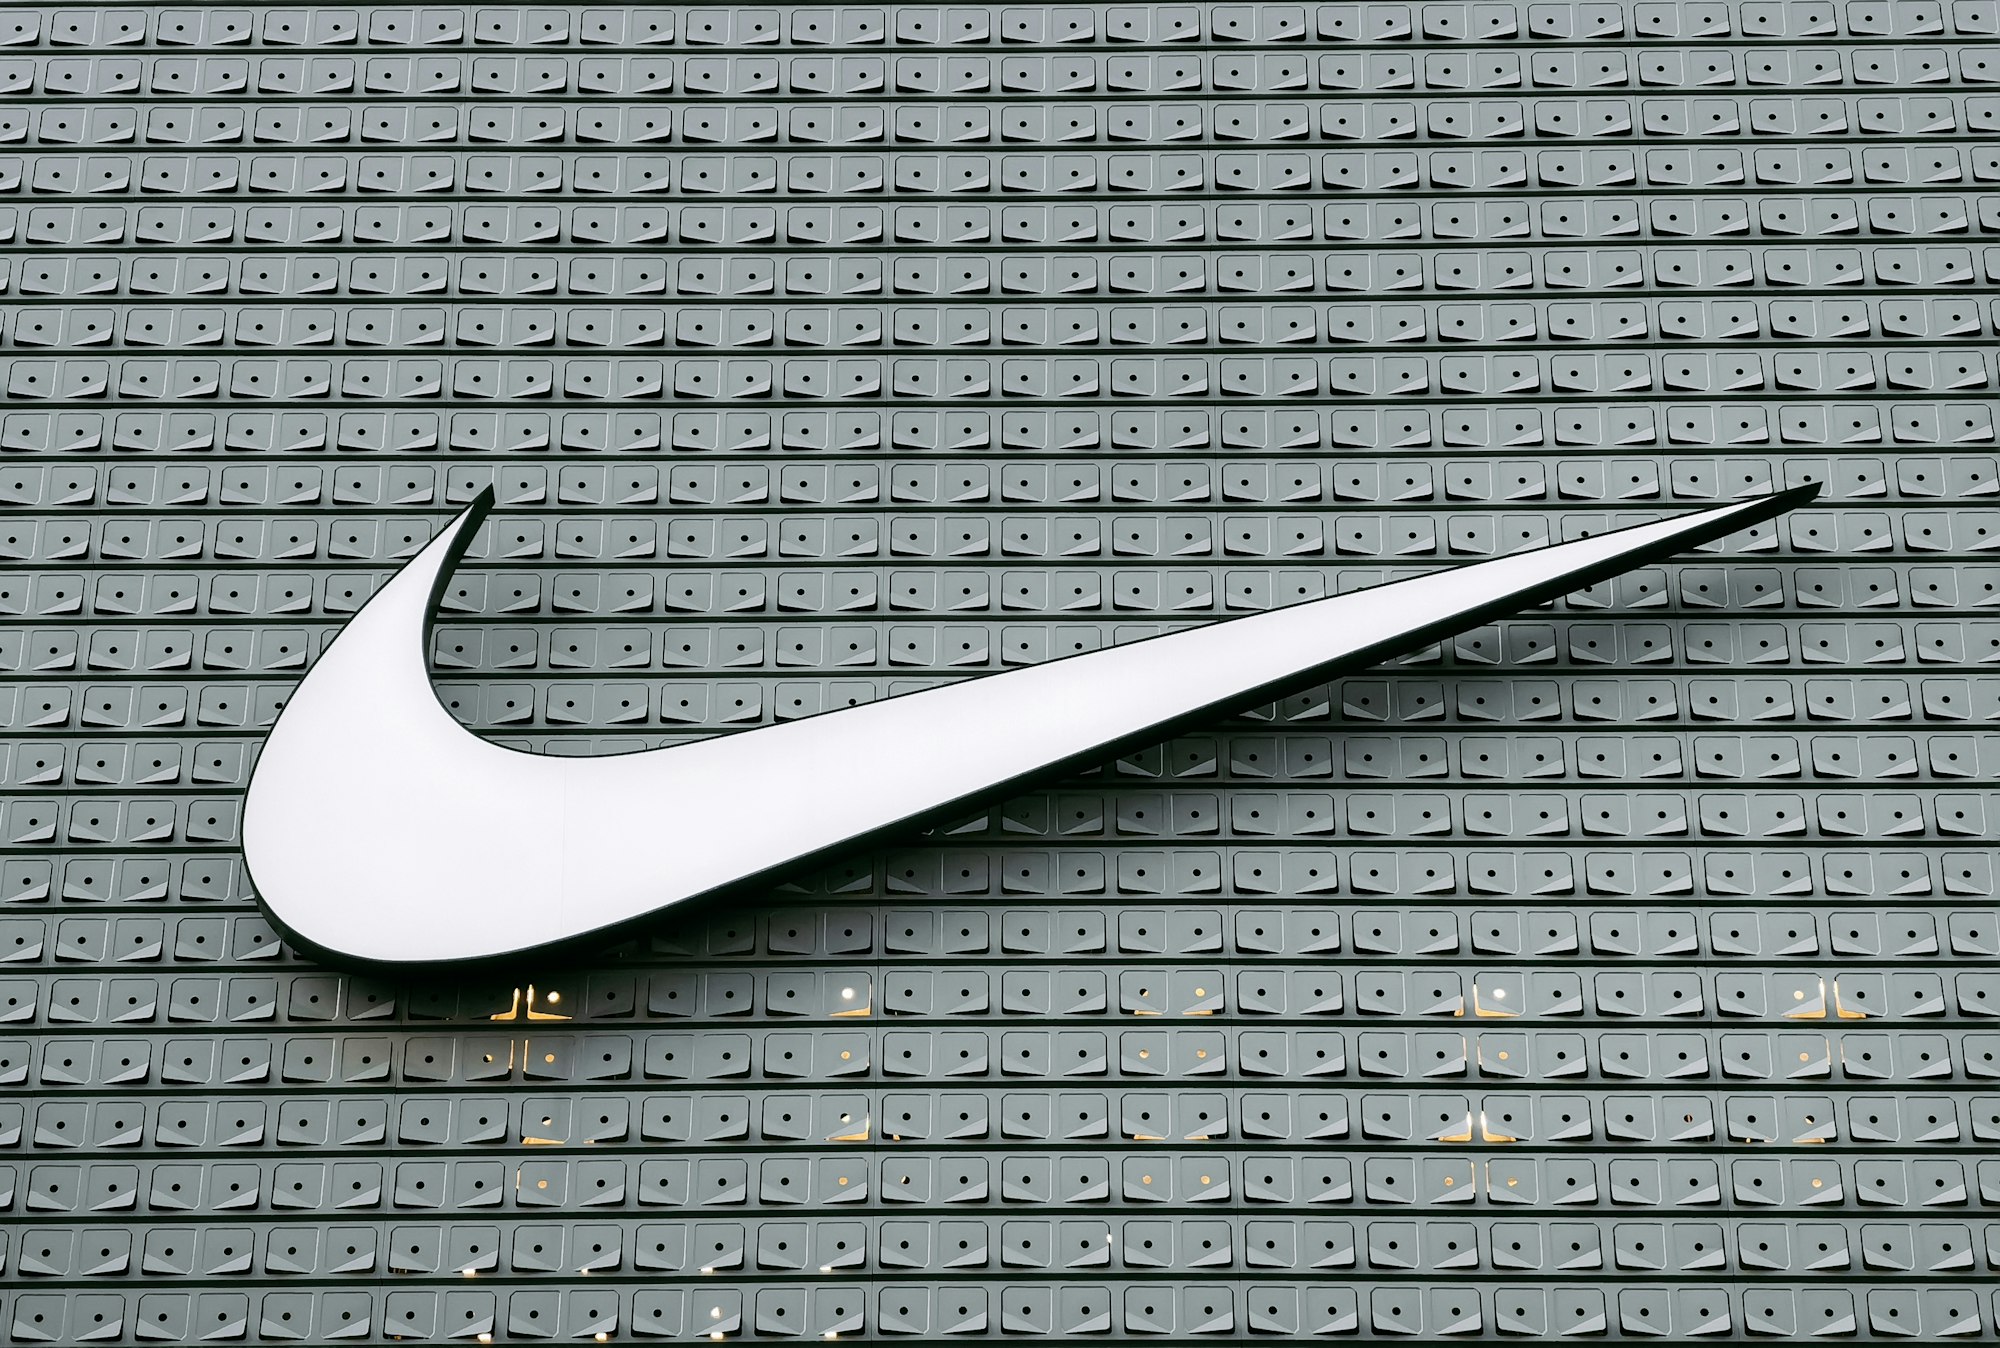 Nike Grapples with Rising Organized Crime Theft in Supply Chain